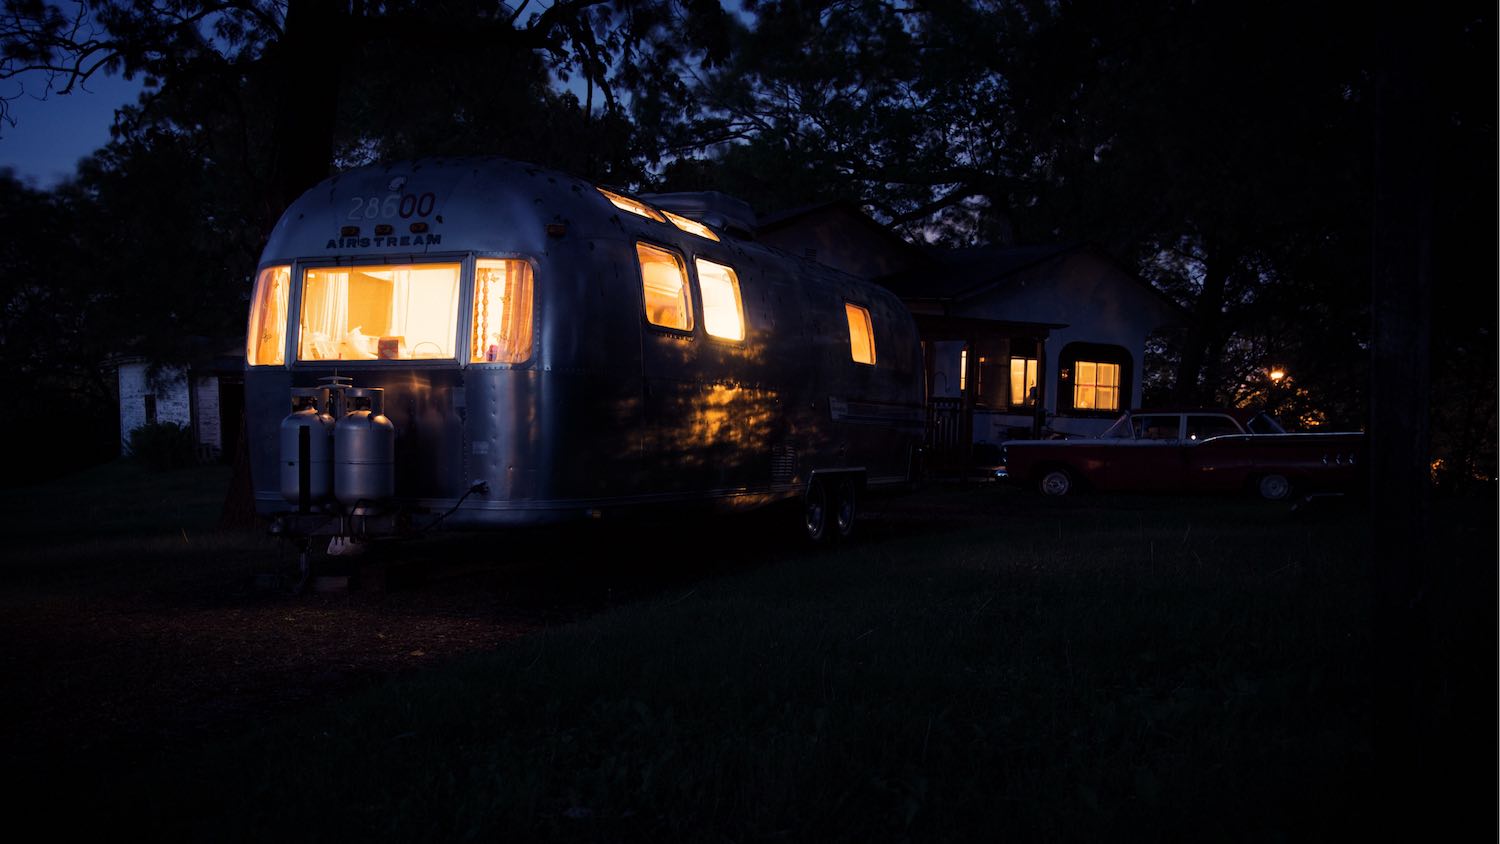 Our Airstream at night has a beautiful glow.